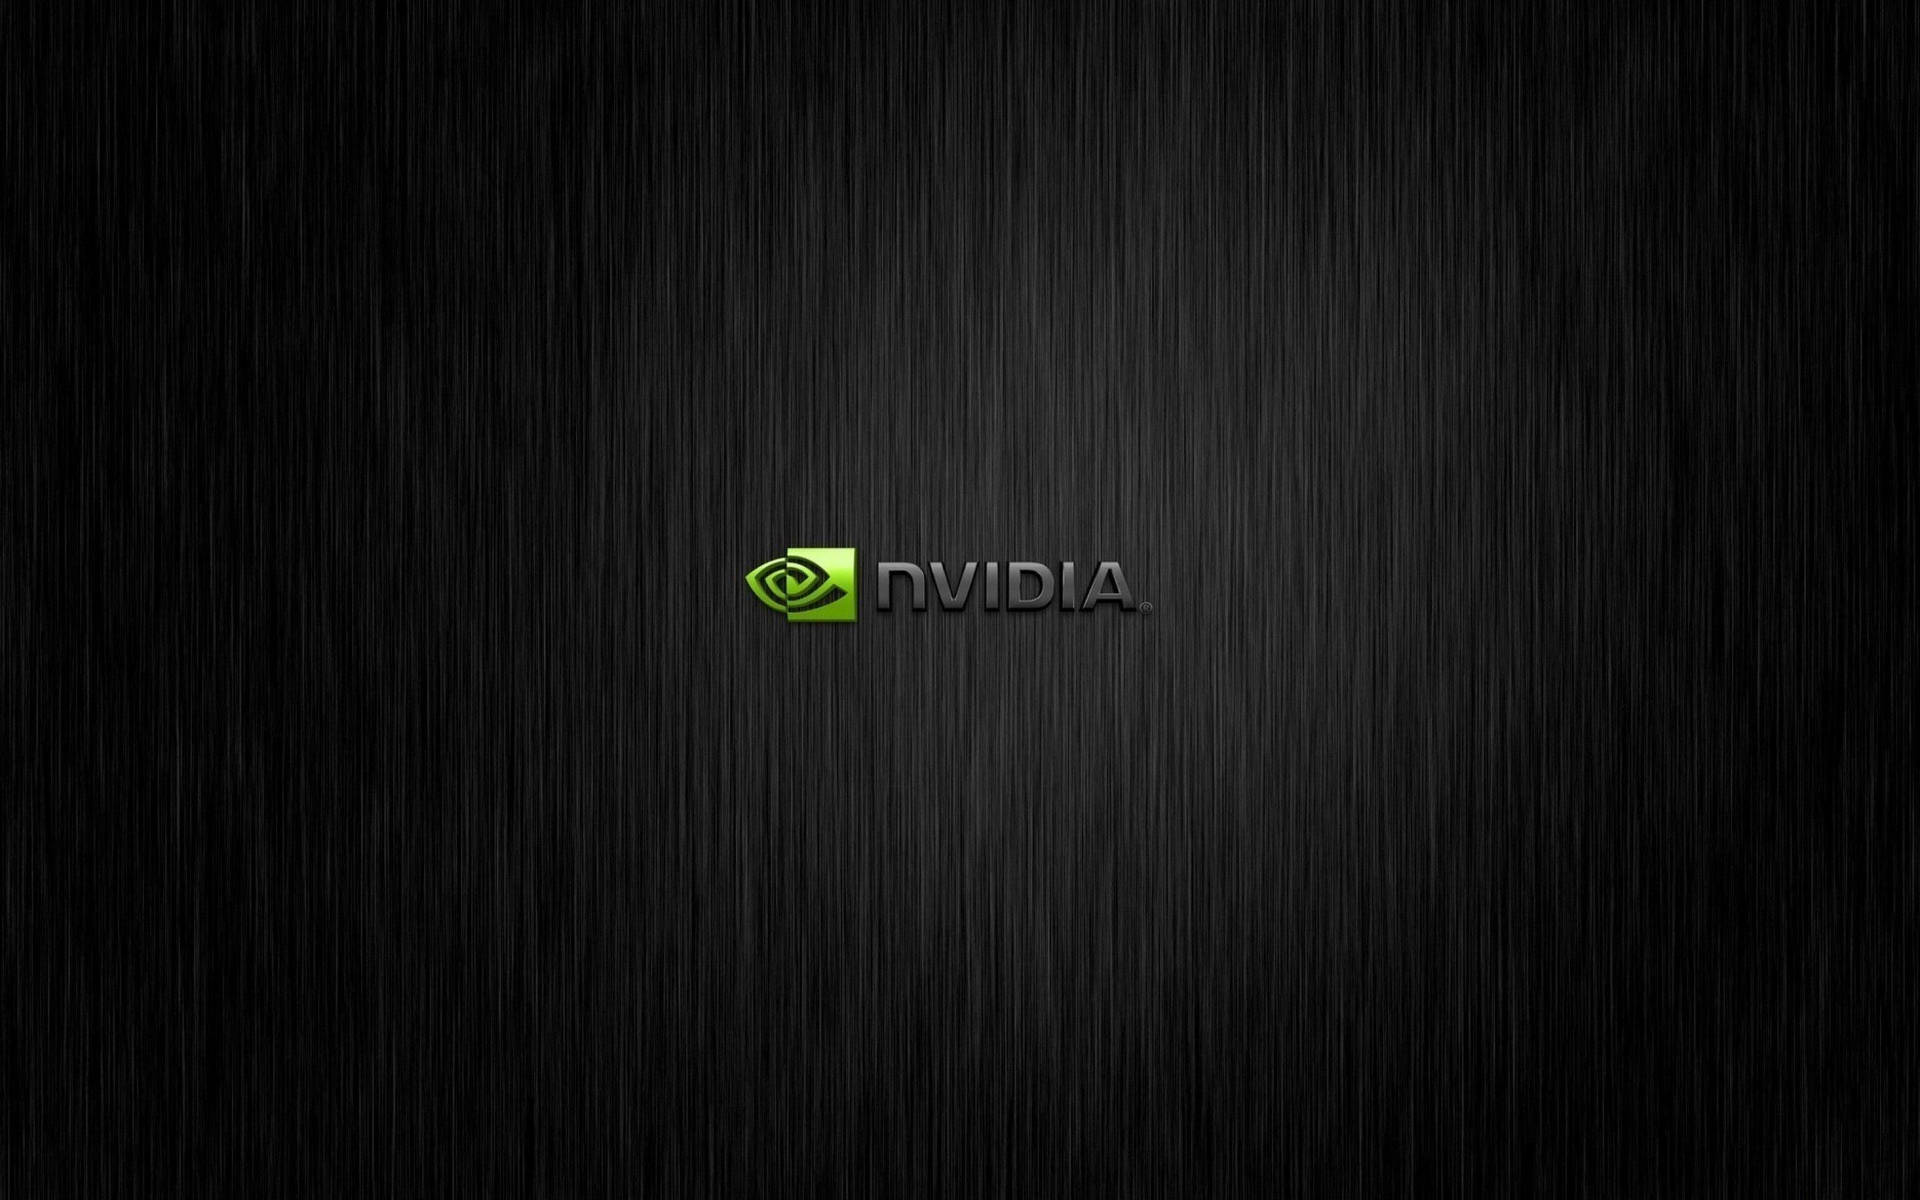 Nvidia 2880X1800 Wallpaper and Background Image